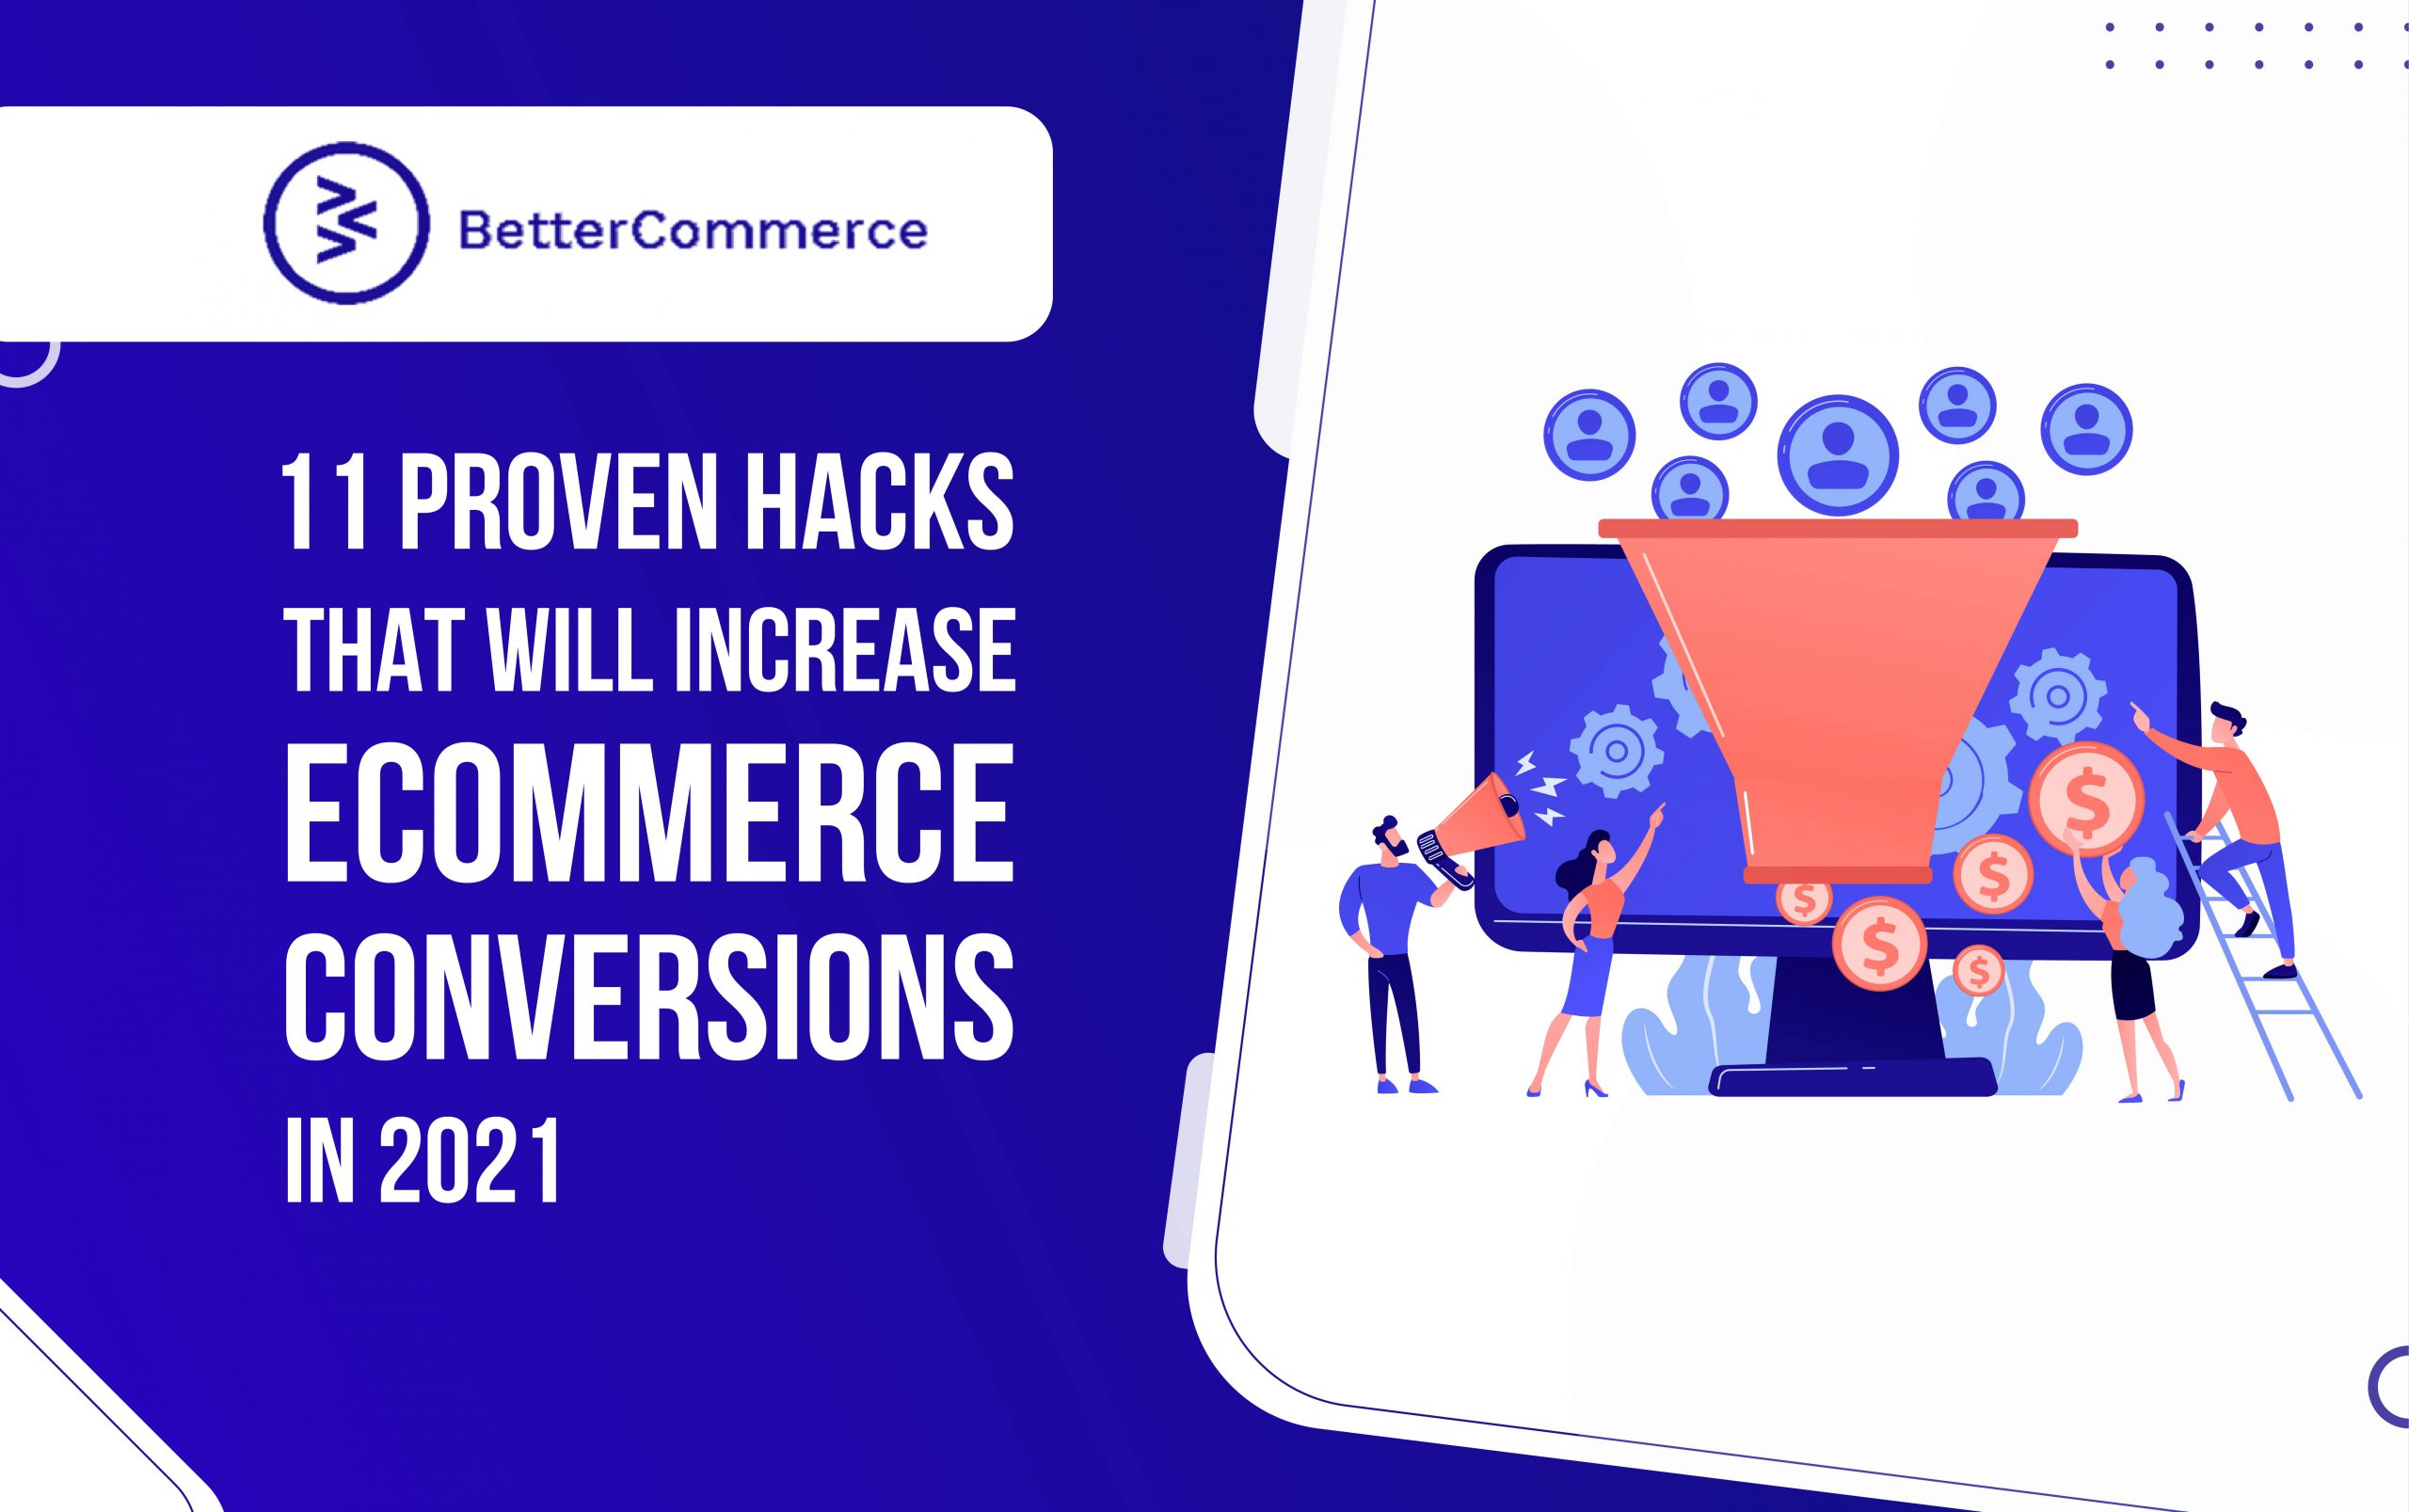 11 proven hacks that will increase eCommerce conversions in 2021